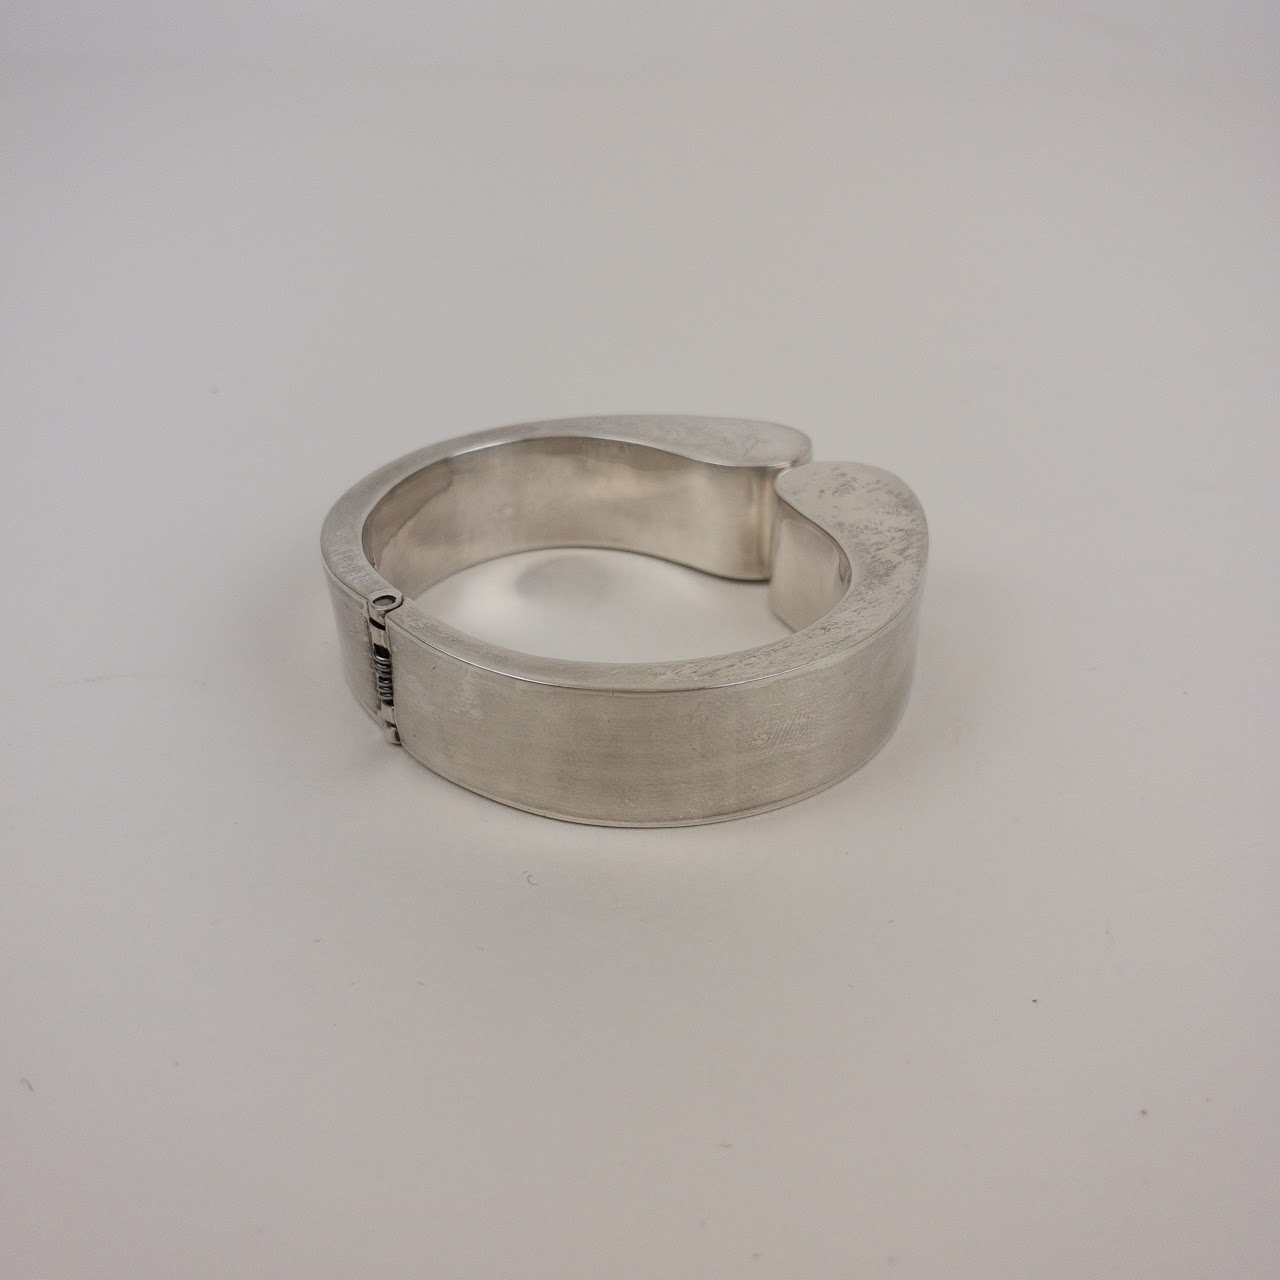 950 Mexican Silver Hinged Bangle Bracelet